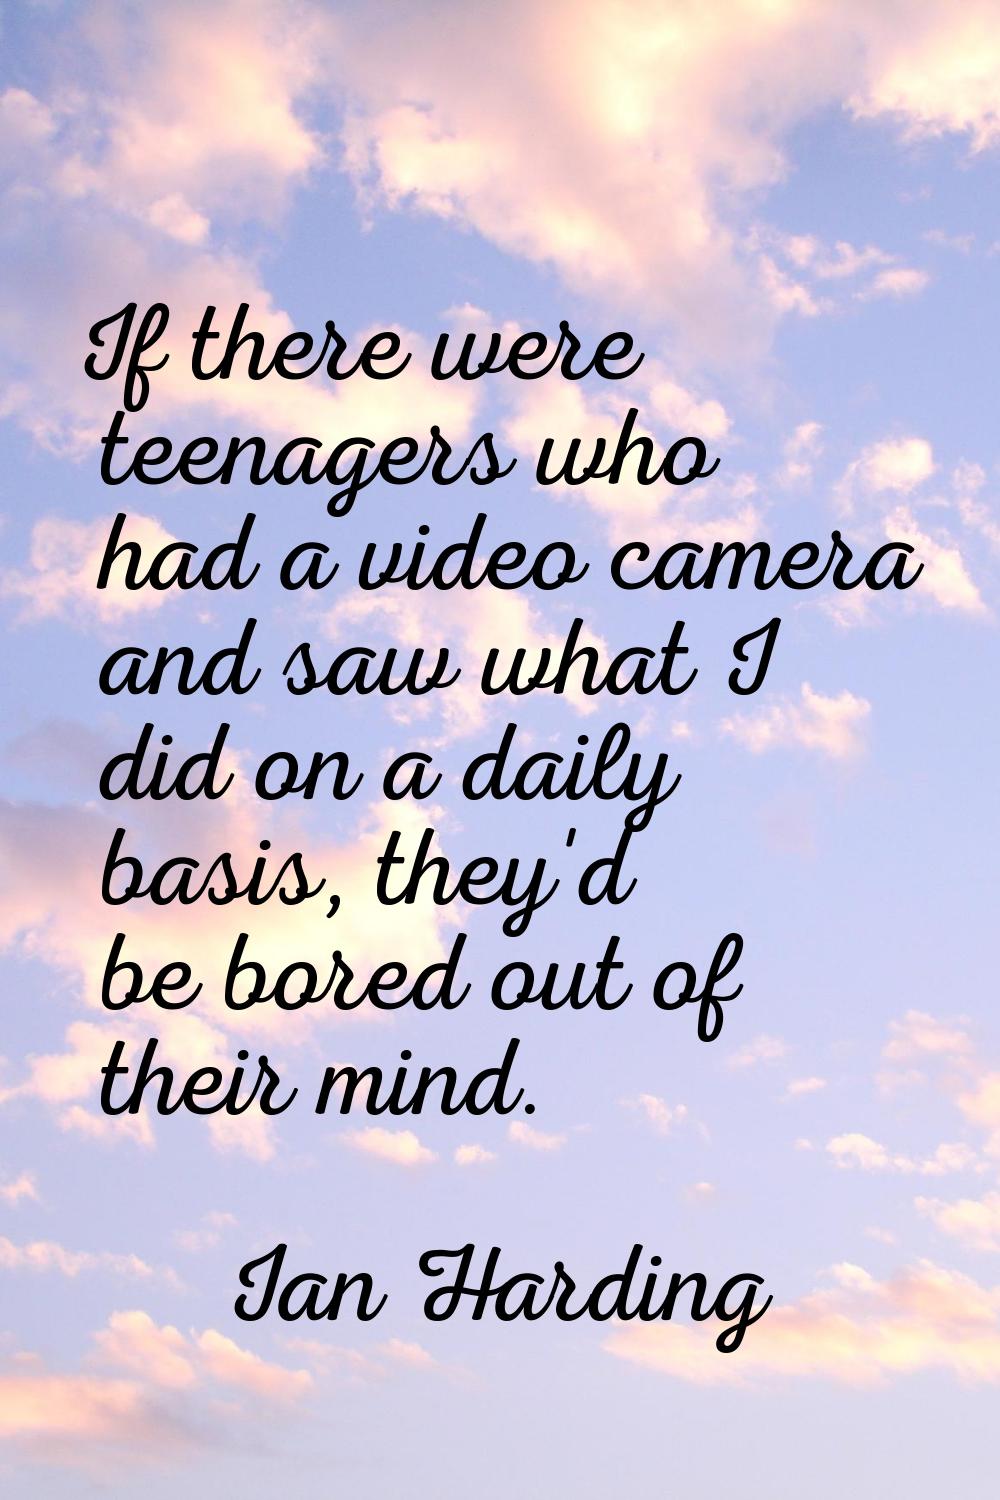 If there were teenagers who had a video camera and saw what I did on a daily basis, they'd be bored